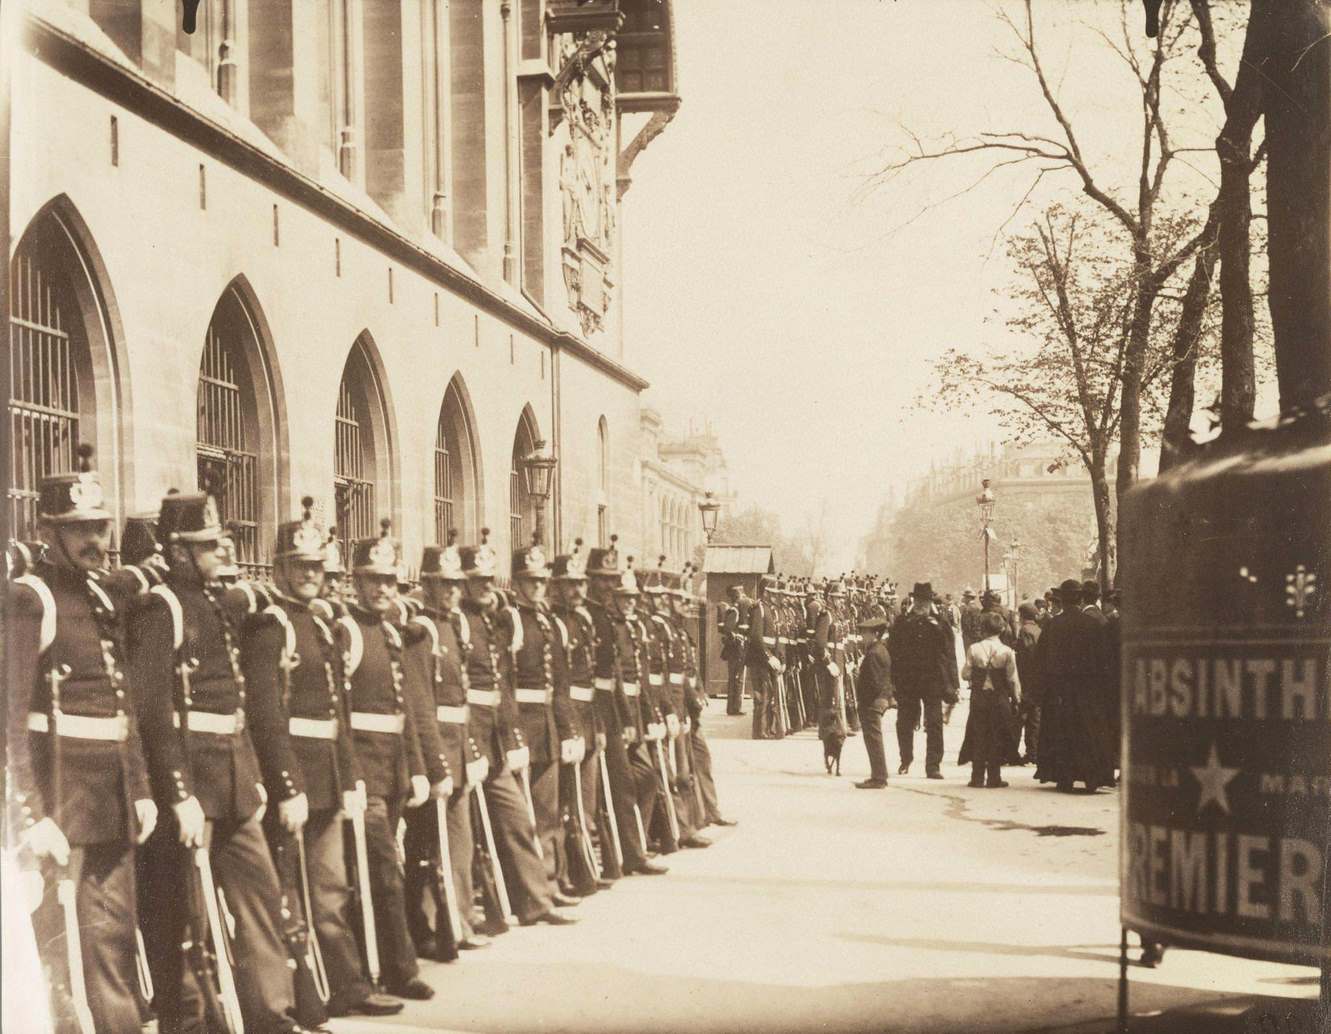 Republican Guards in Front of the Palais de Justice, 1900